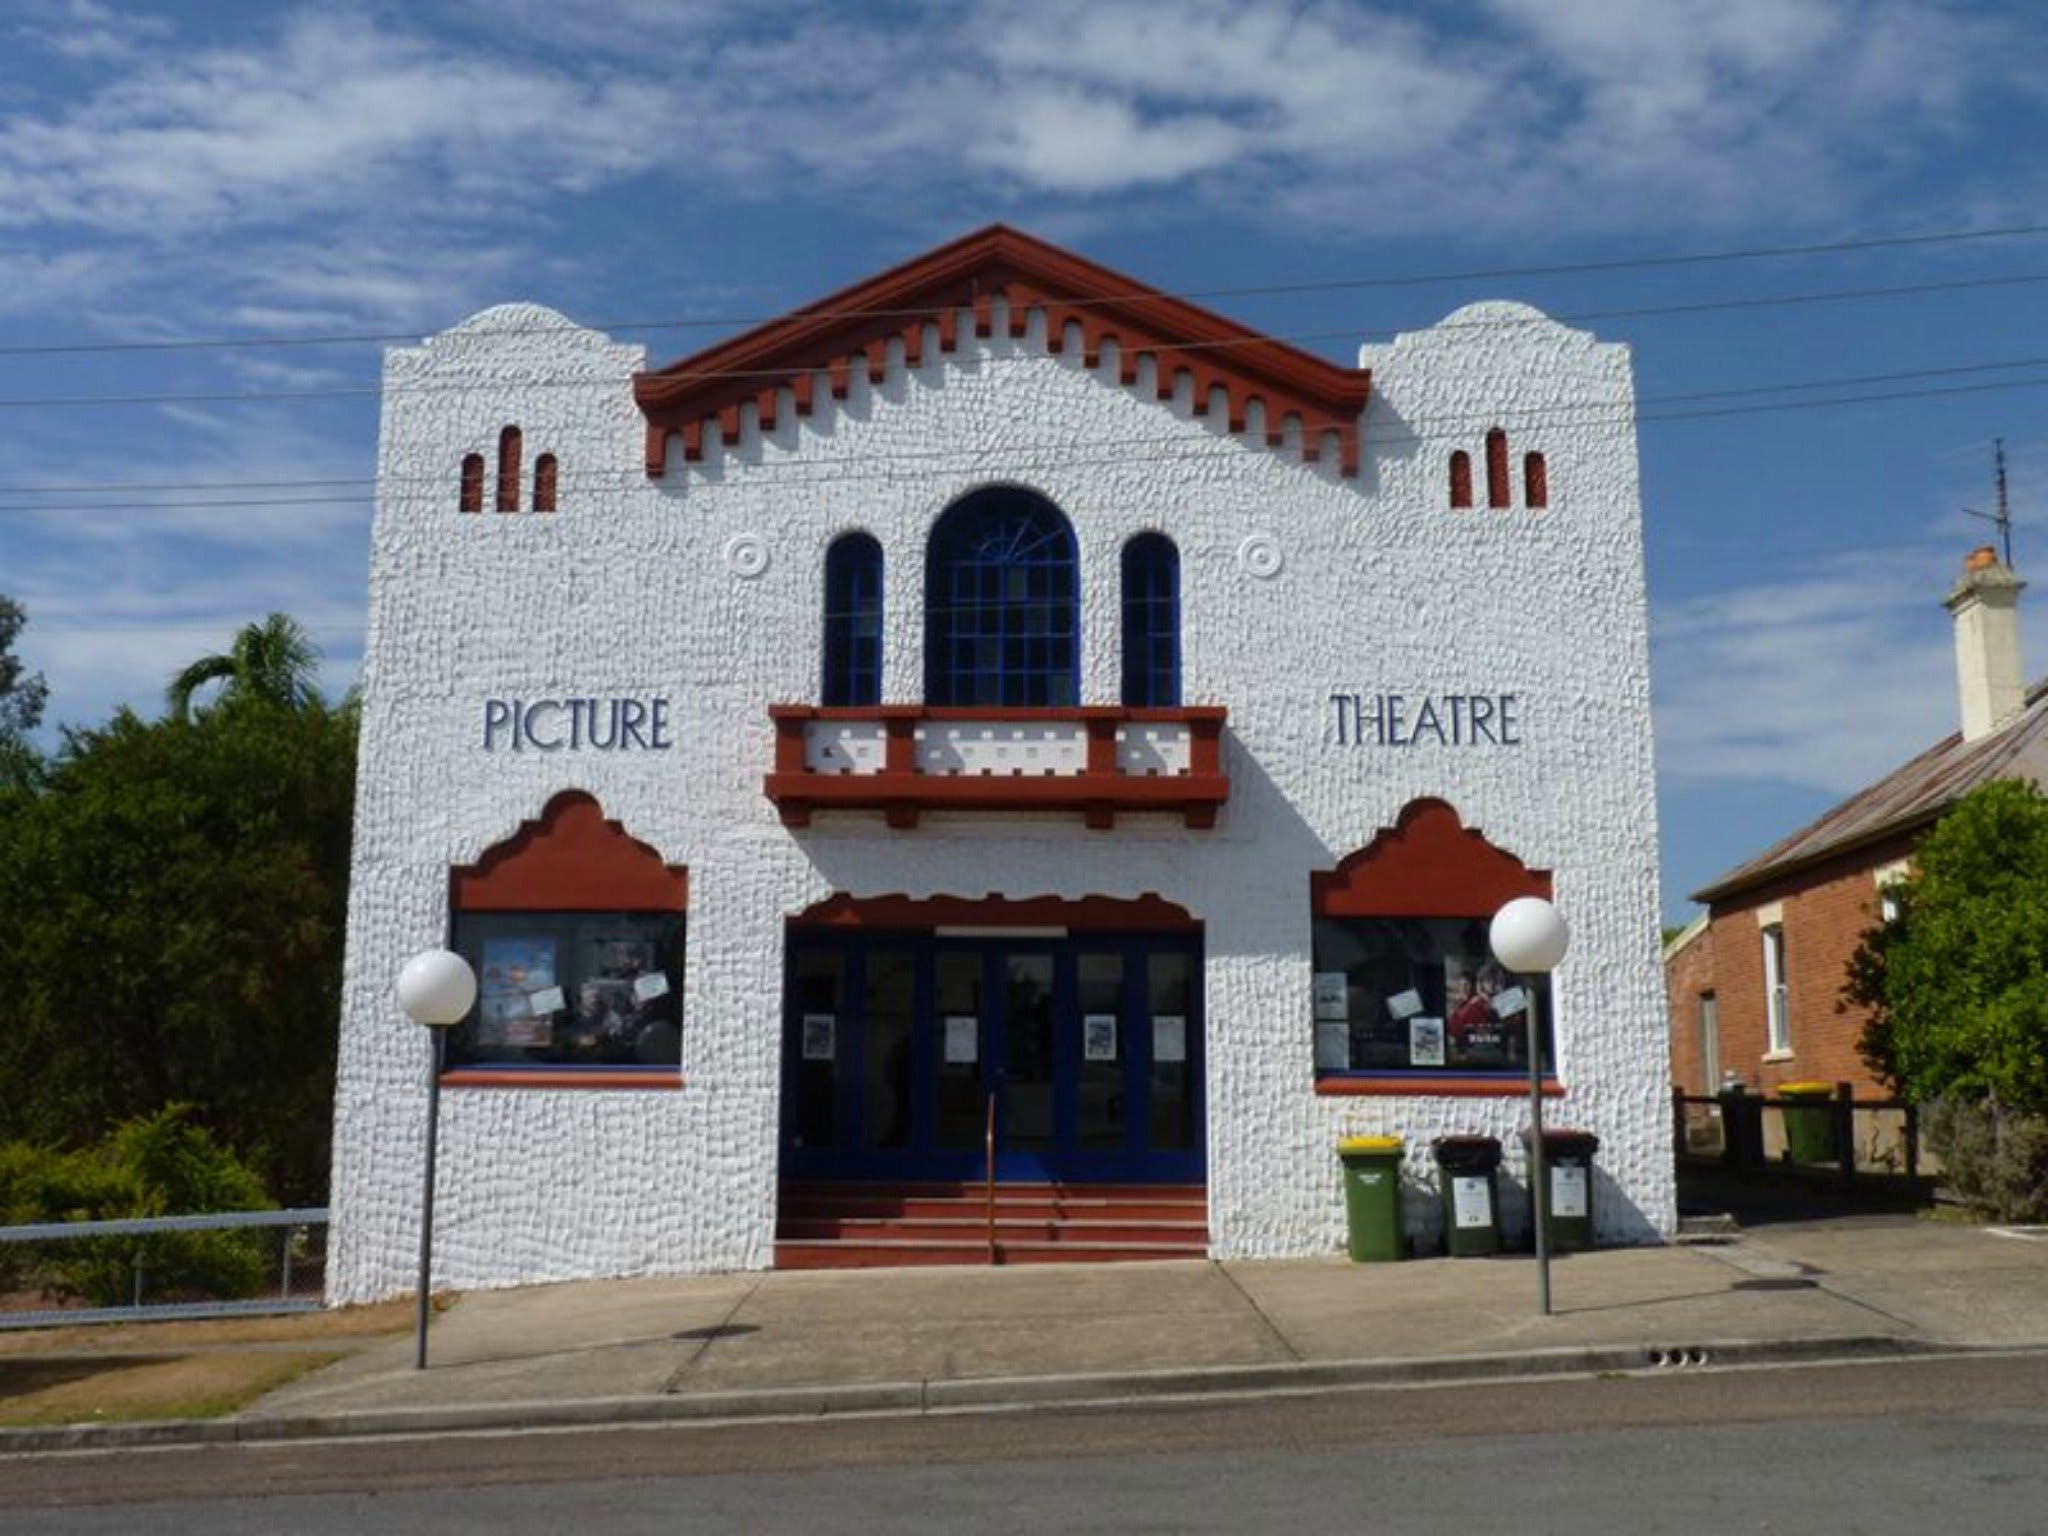 Dungog James Theatre - Hotel Accommodation